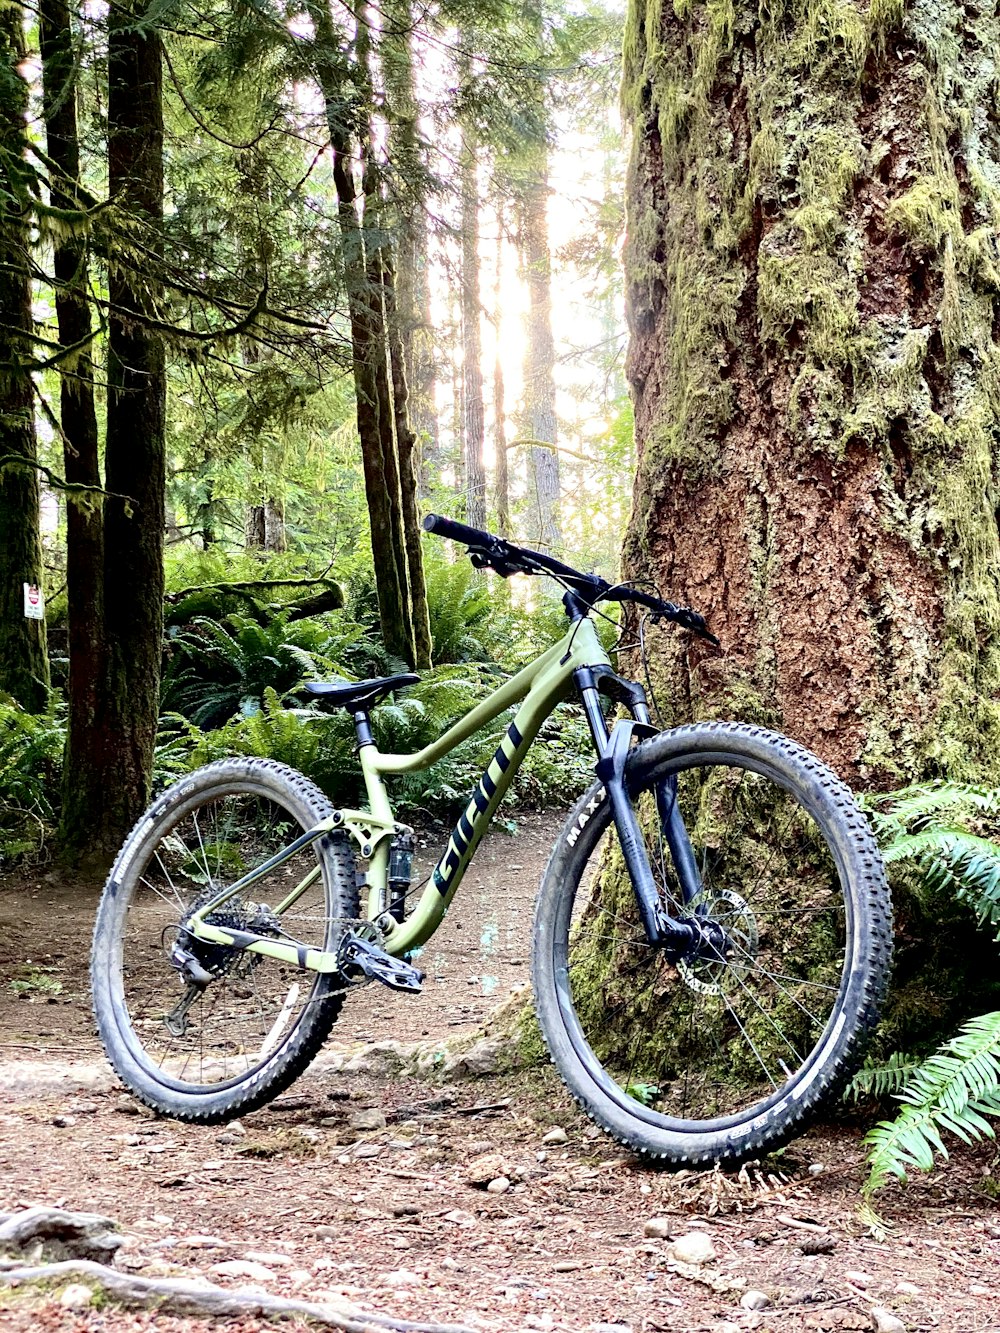 green and black mountain bike parked beside brown tree